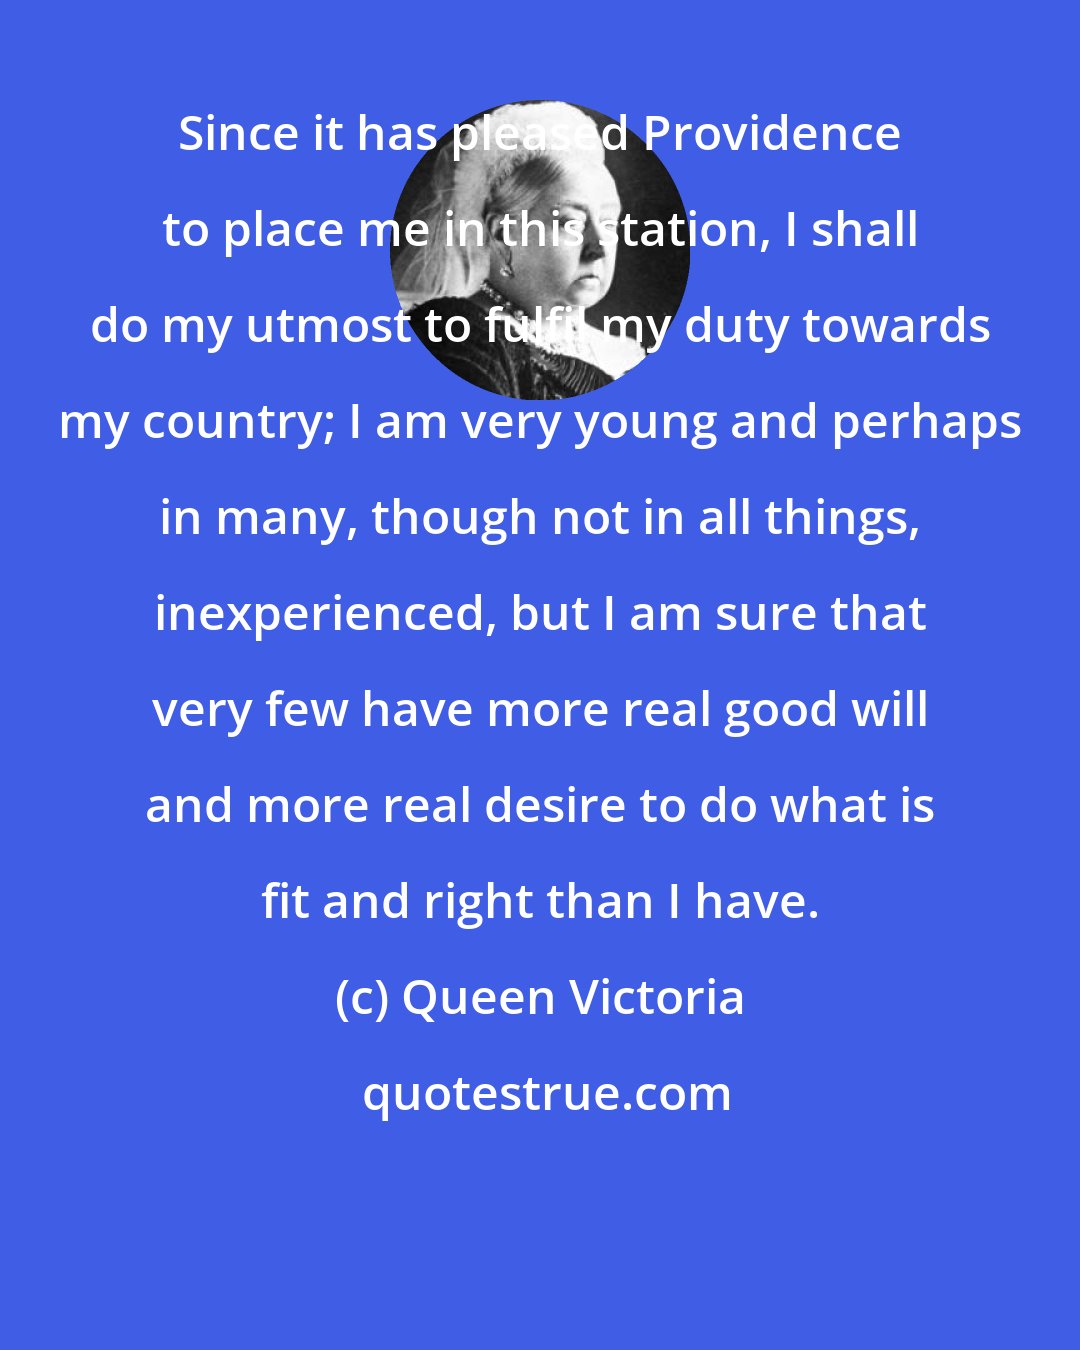 Queen Victoria: Since it has pleased Providence to place me in this station, I shall do my utmost to fulfil my duty towards my country; I am very young and perhaps in many, though not in all things, inexperienced, but I am sure that very few have more real good will and more real desire to do what is fit and right than I have.